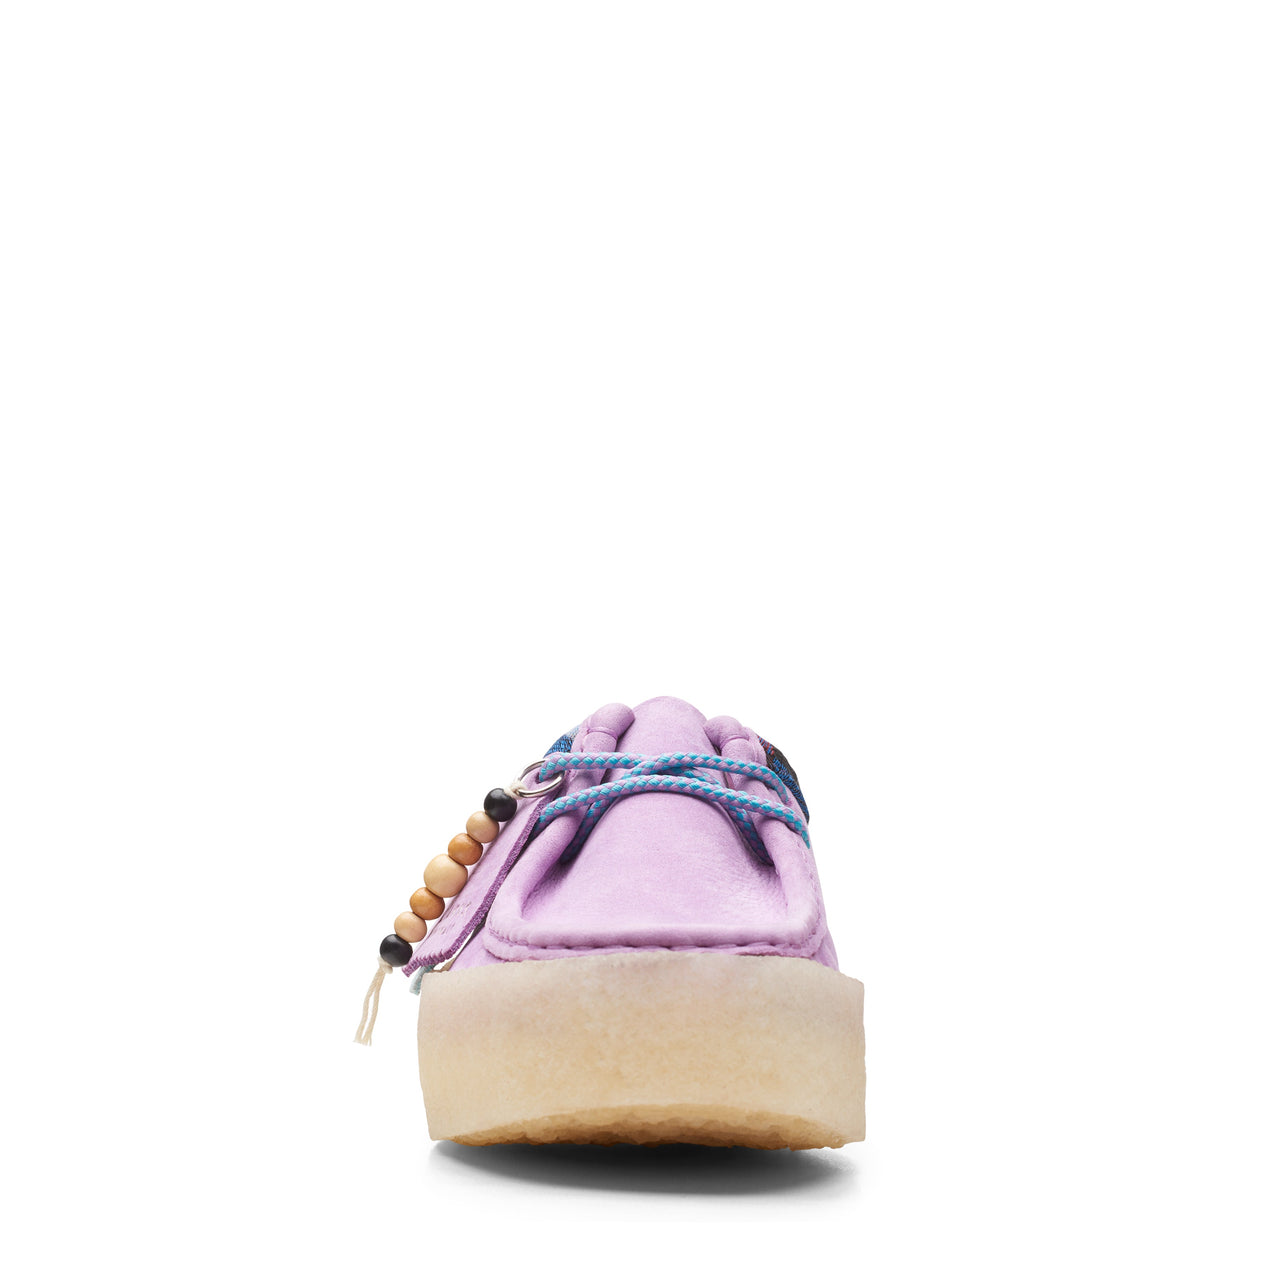  Side view of light purple Clarks Women Wallabee Cup Shoes with white sole